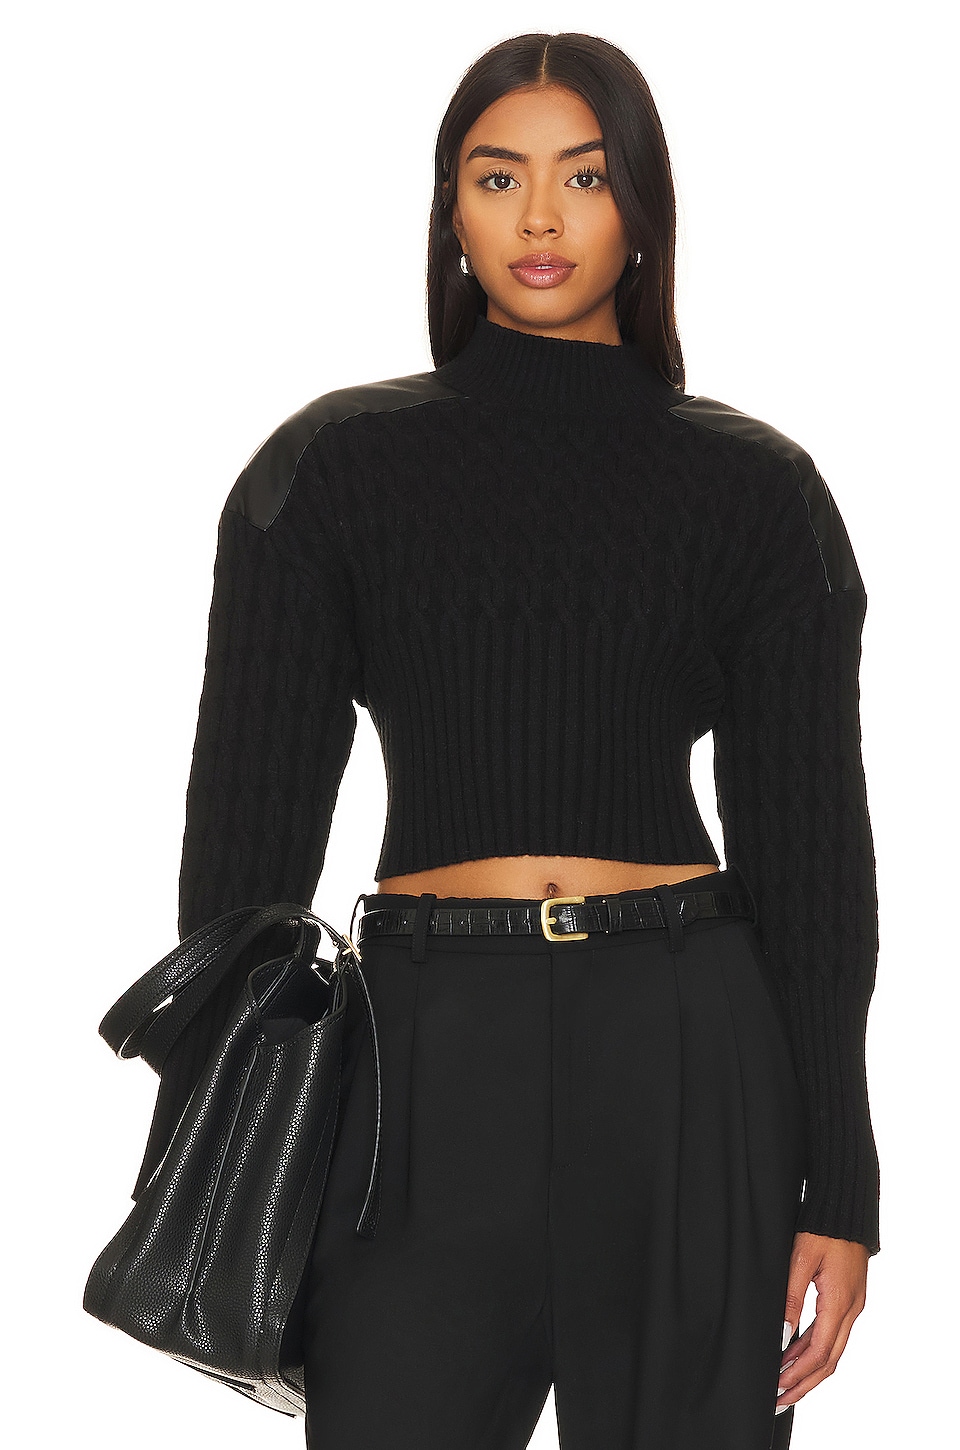 свитер central park west khloe cable turtleneck черный Свитер Central Park West Khloe Cable Turtleneck, черный